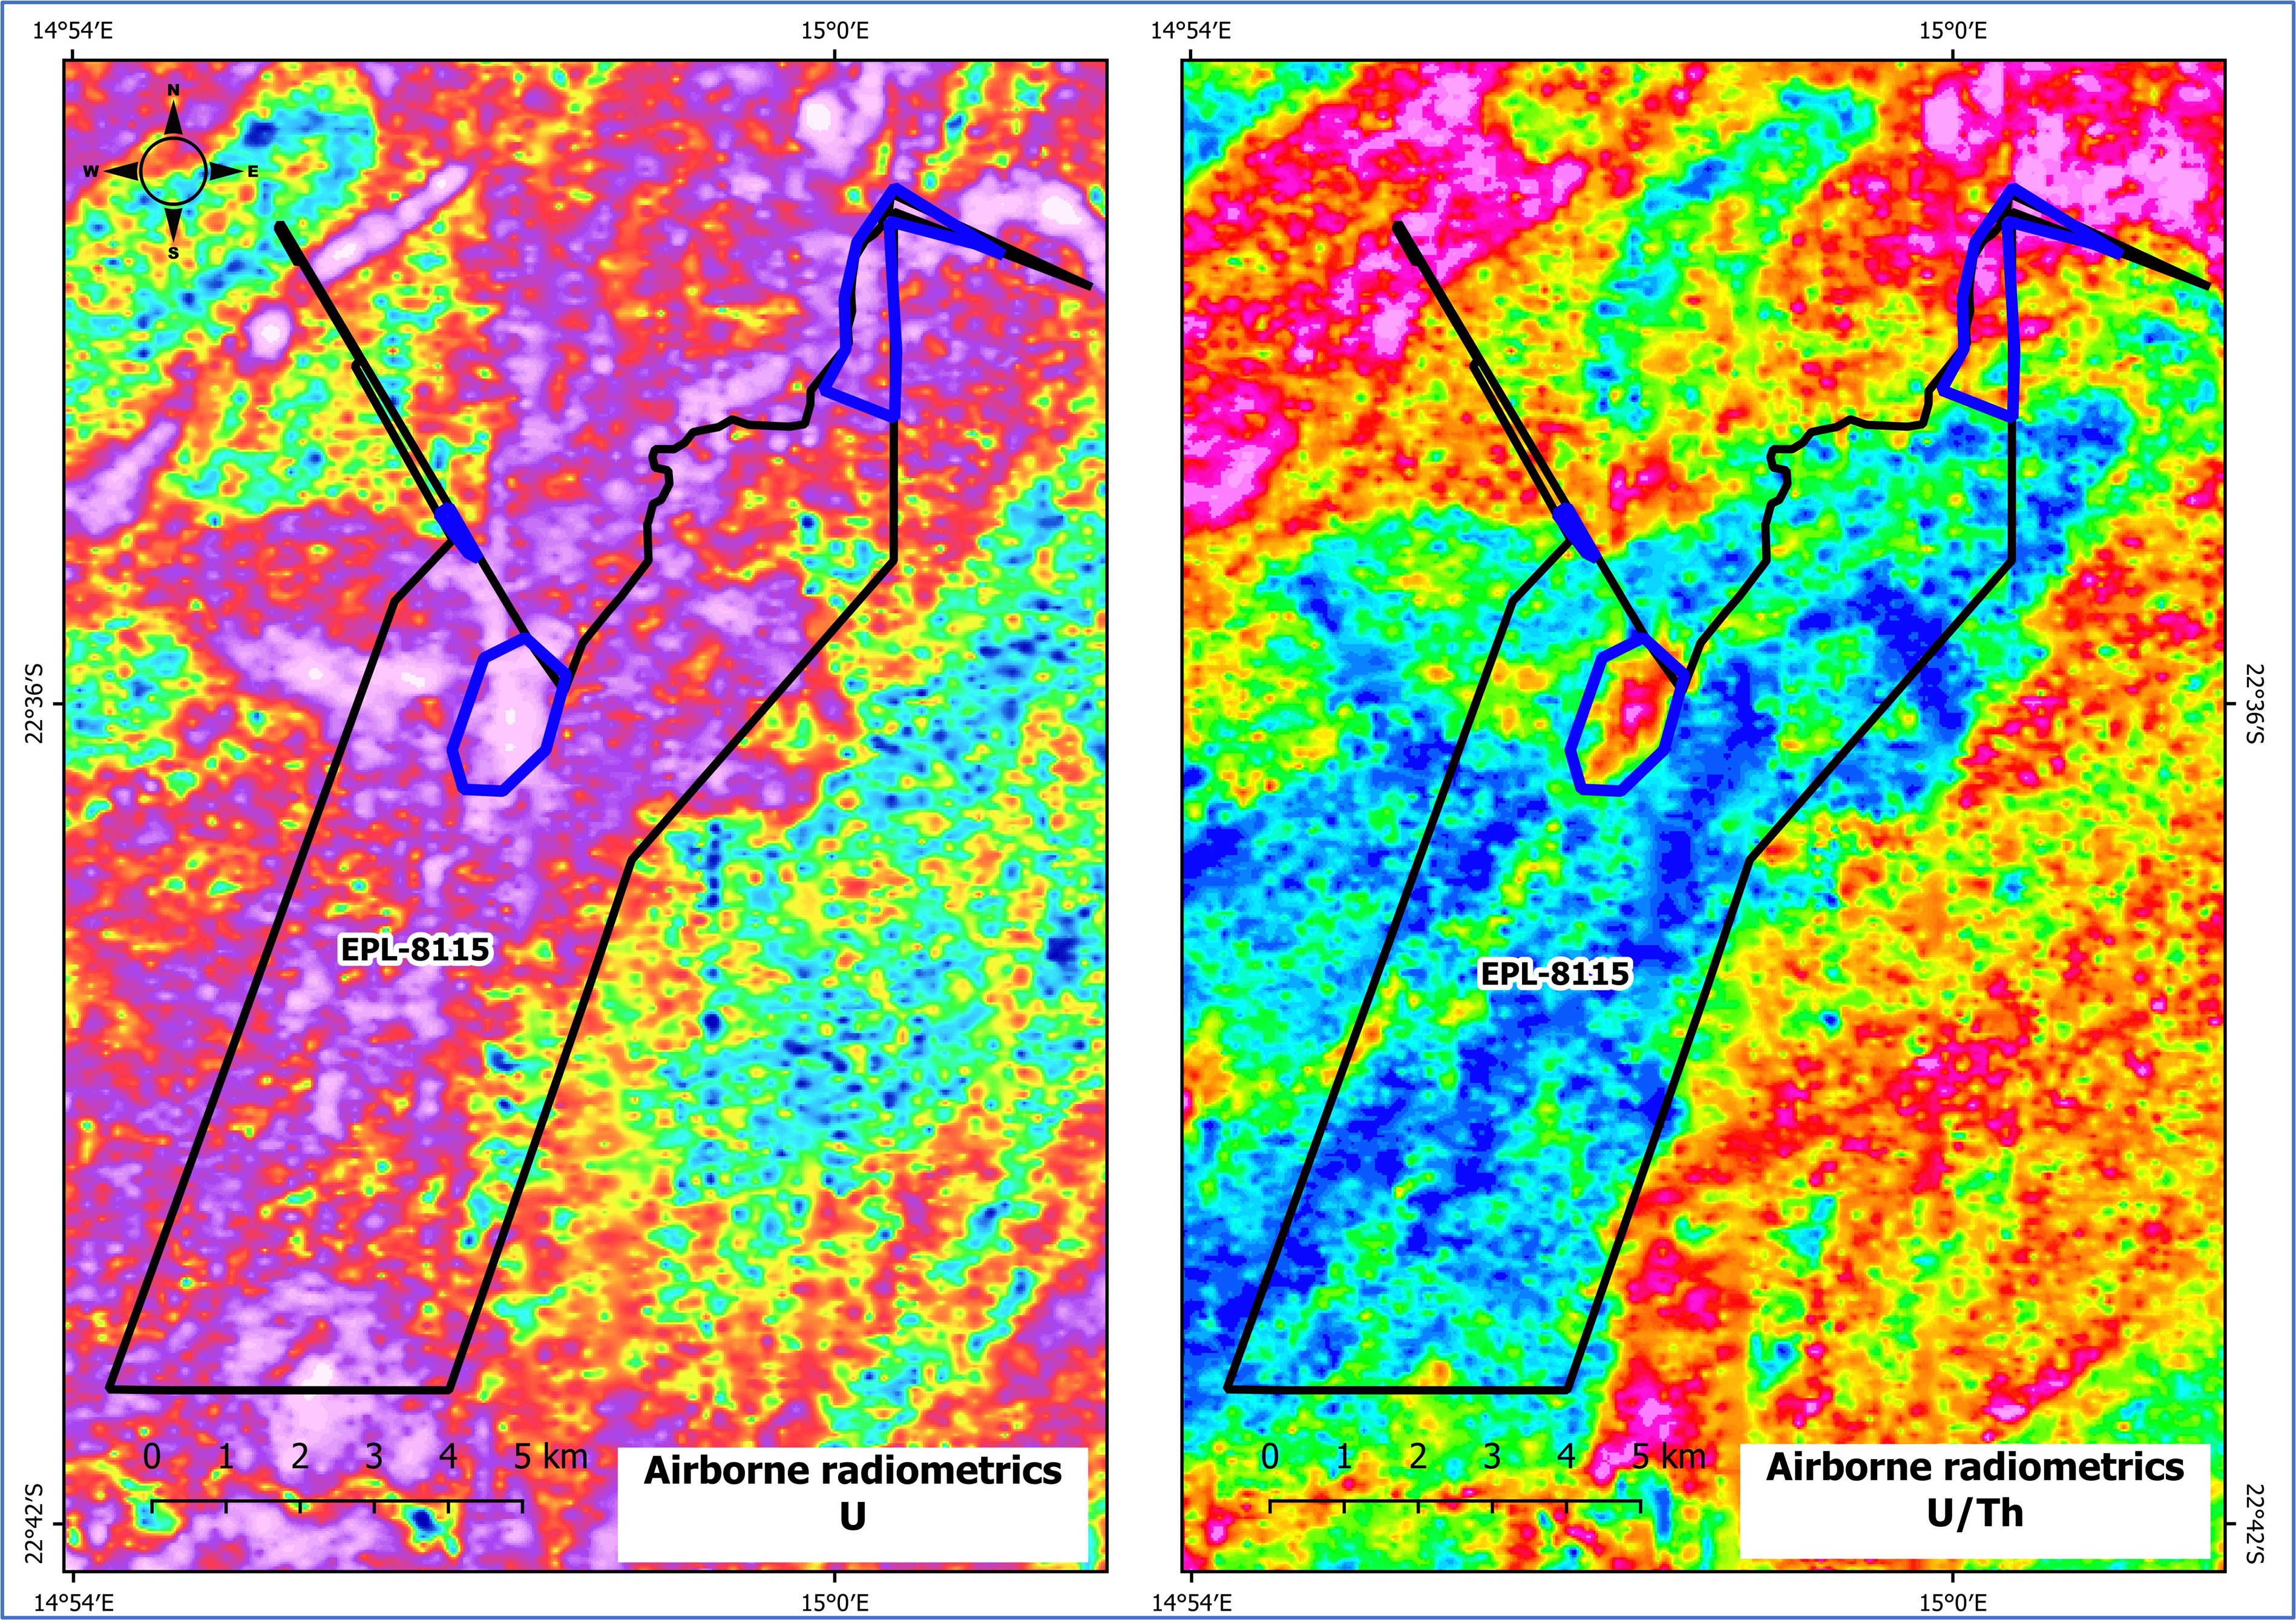 Airborne radiometric signature and targets (blue outline) over EPL-8115.